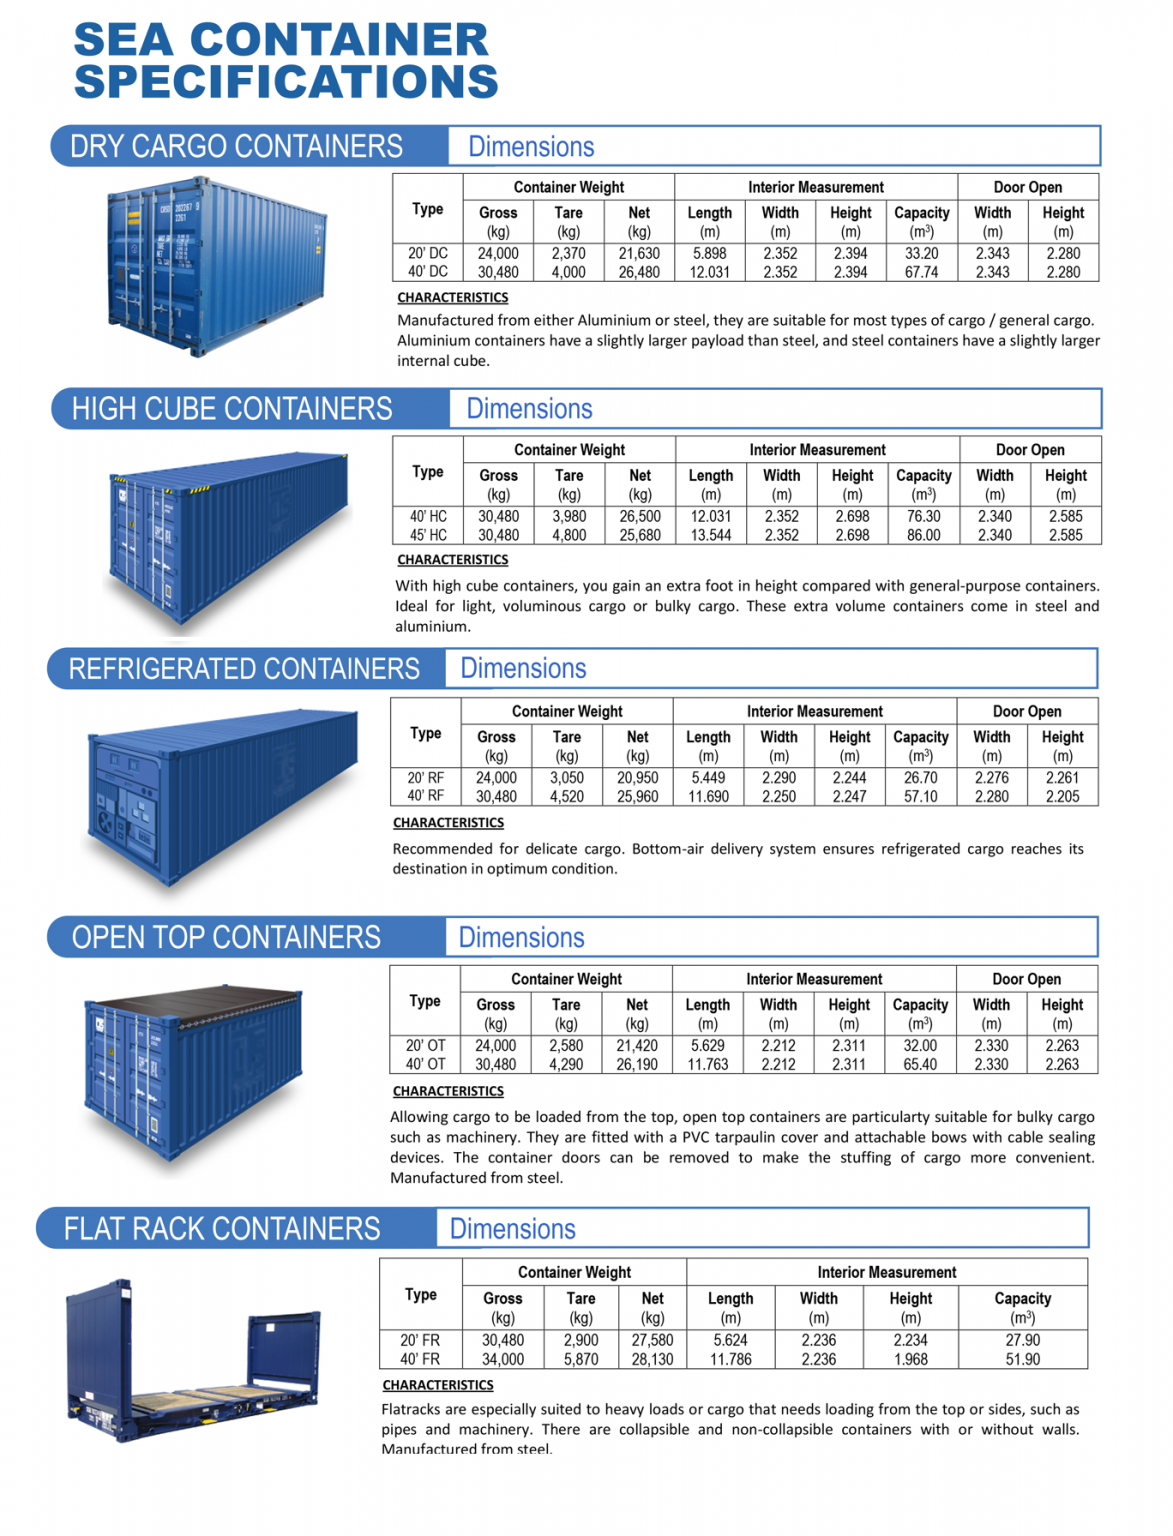 Sea Container Specifications 1173x1536 